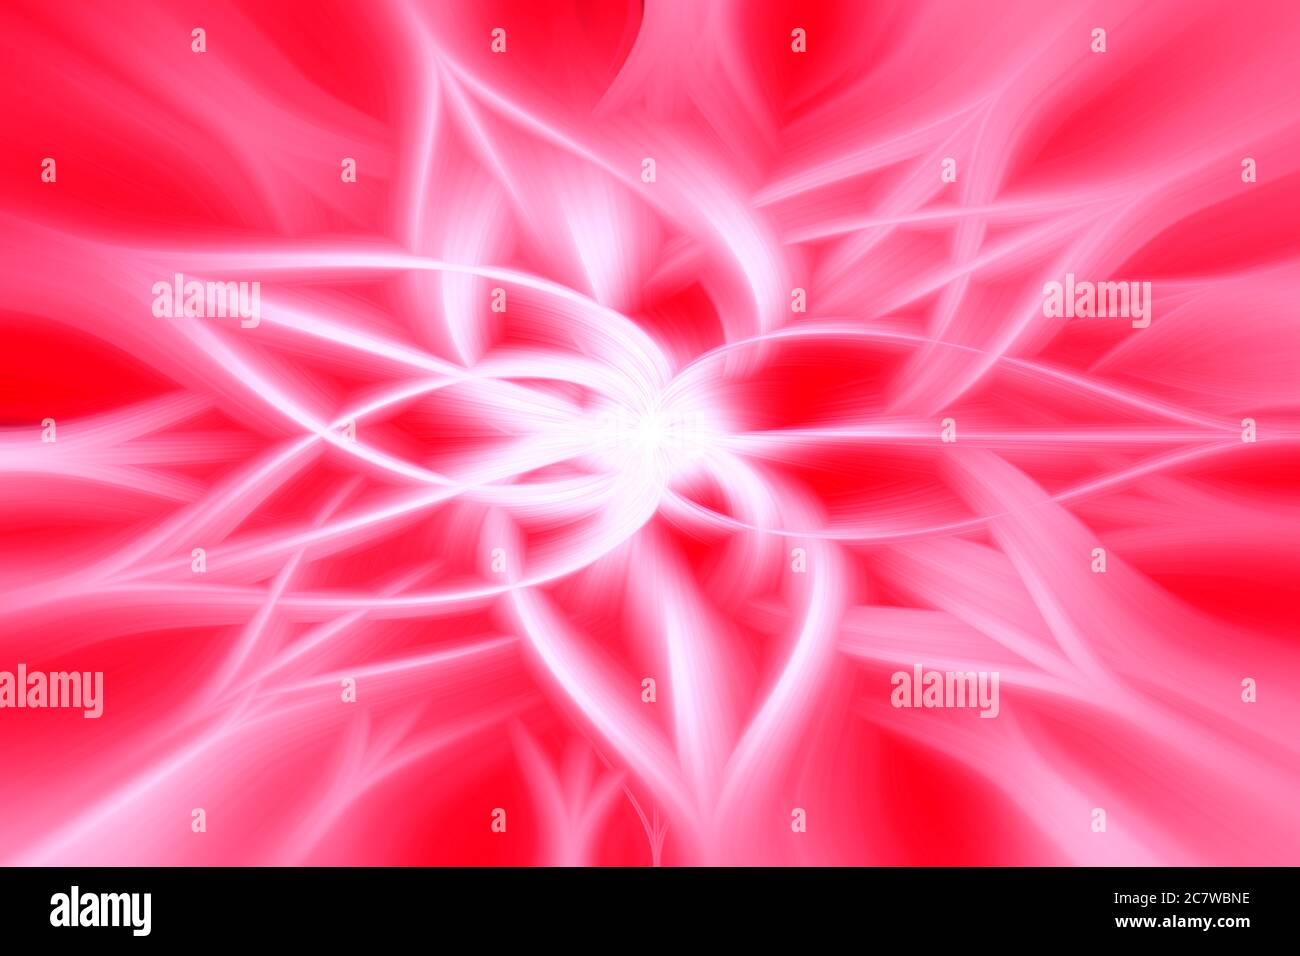 White intertwining 3d fibers on bright red background. Abstract web design. Illustration Stock Photo